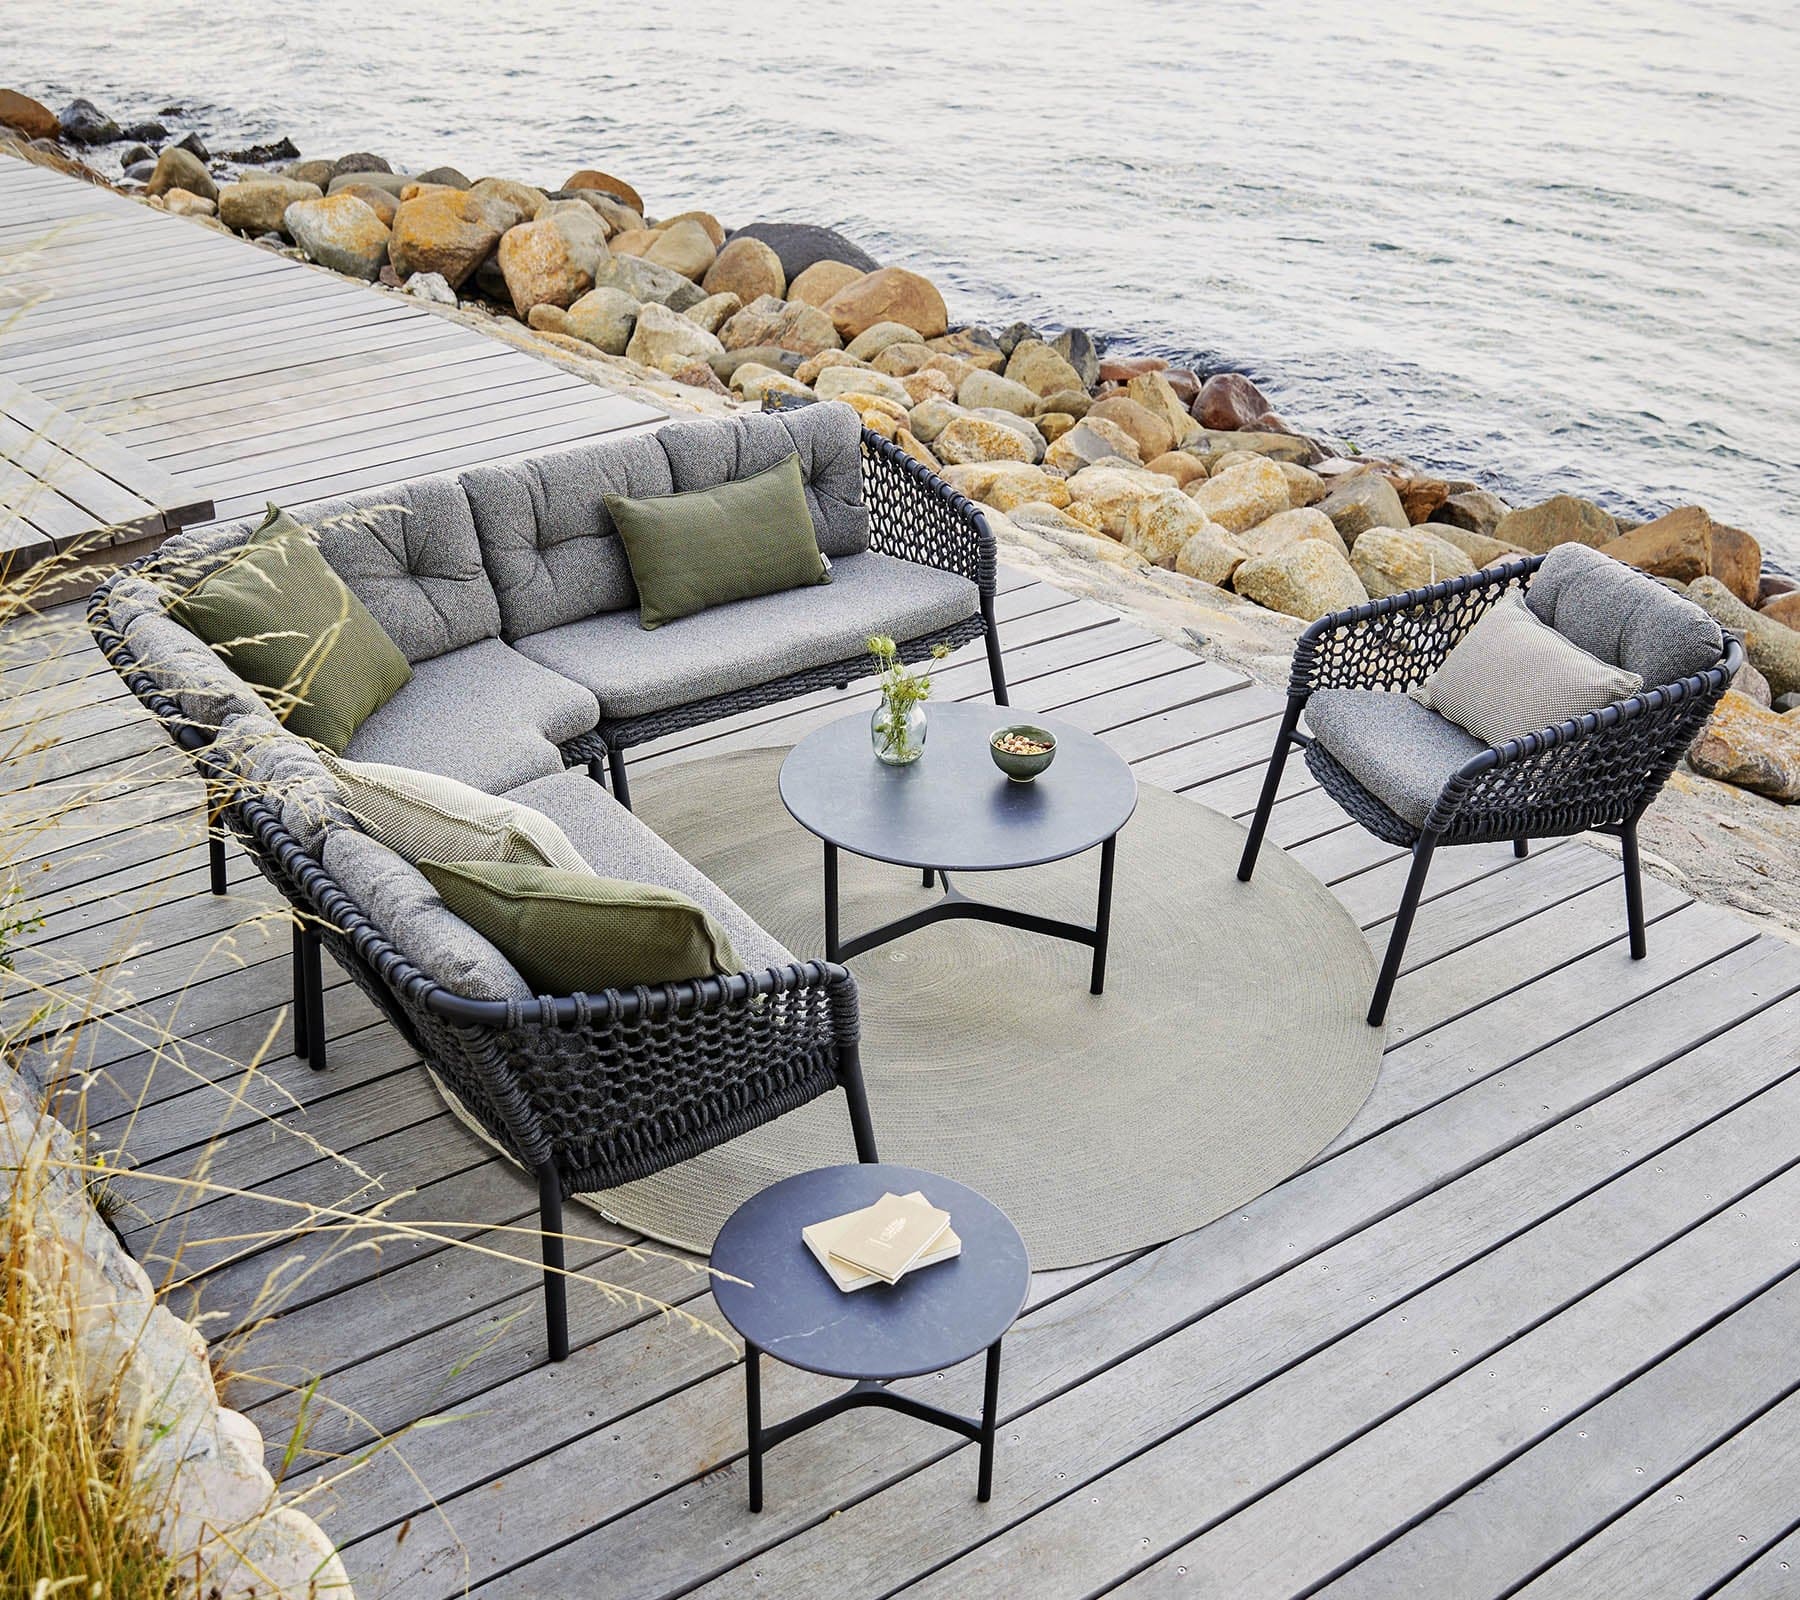 Boxhill's Ocean Outdoor Corner Sofa Module lifestyle image with other Ocean Module Sofa and Chair Collection, and 2 round table on wooden platform beside rocky seashore